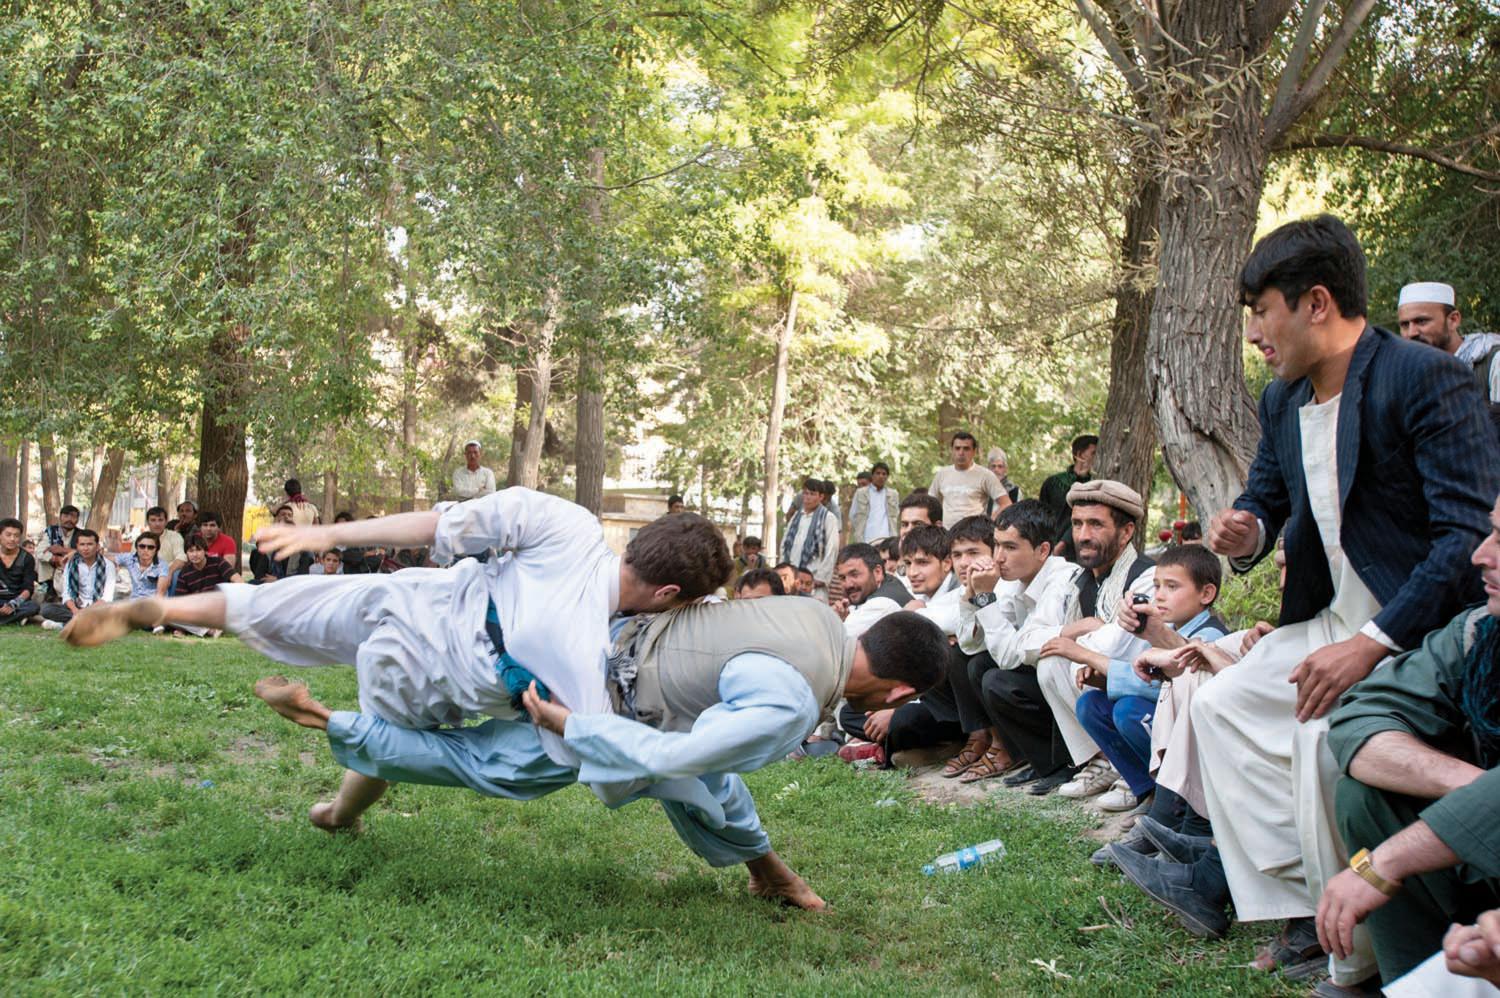 Men gamble on a Karate match in Shar-e-Now Park, in downtown Kabul. Under the Taliban government, activities involving gambling and most forms of play were strictly forbidden, including favorite pastimes like bird and dog fighting.